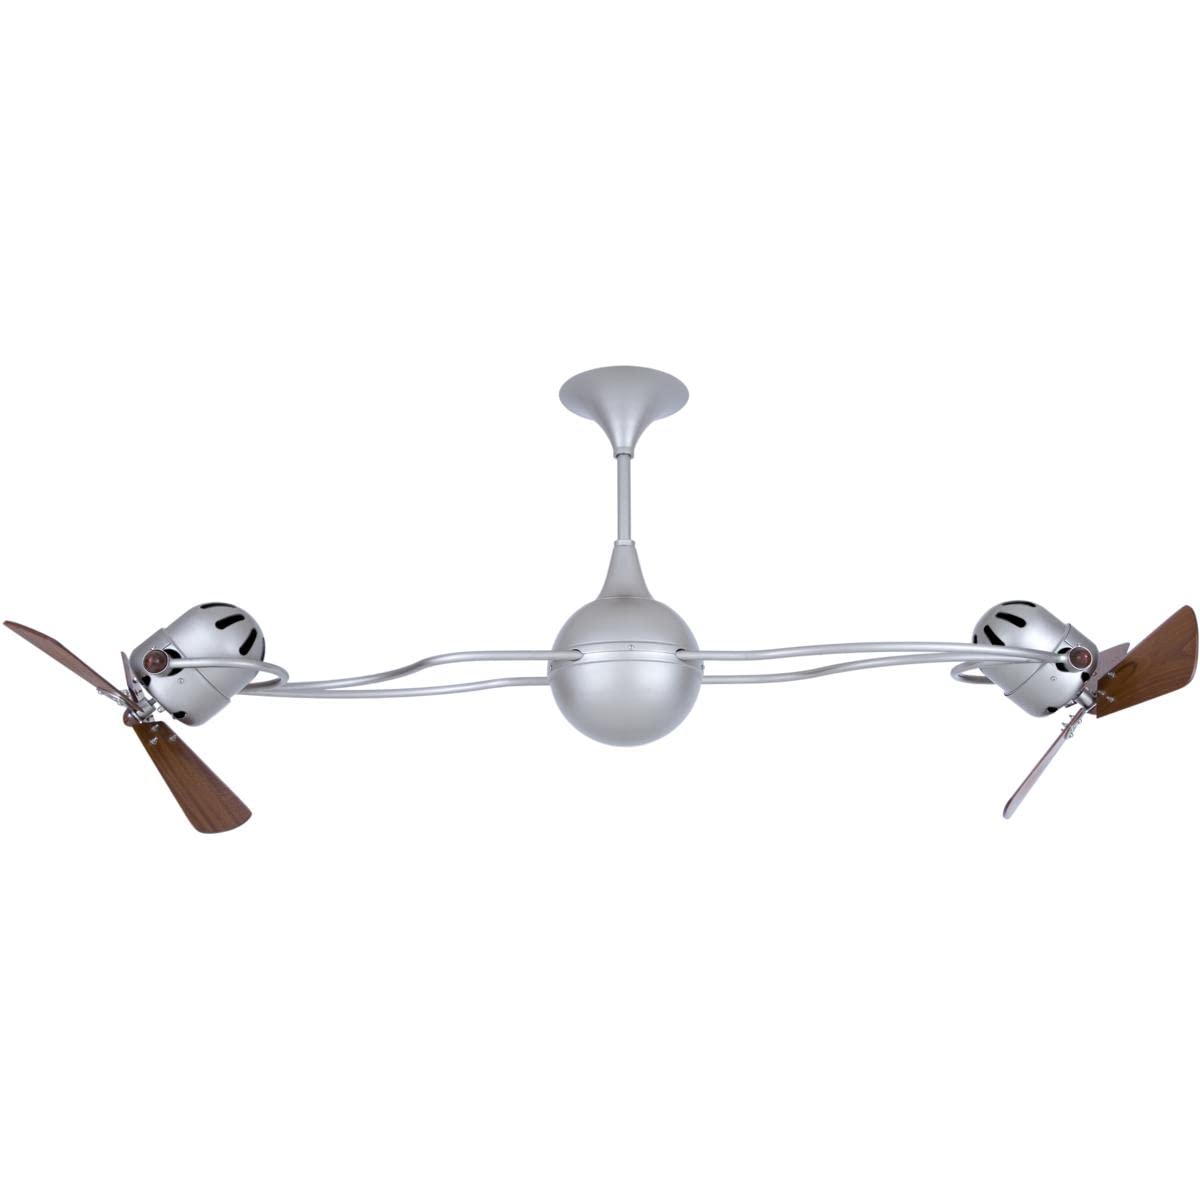 Matthews Fan IV-BN-WD Italo Ventania 360° dual headed rotational ceiling fan in brushed nickel with solid sustainable mahogany wood blades.